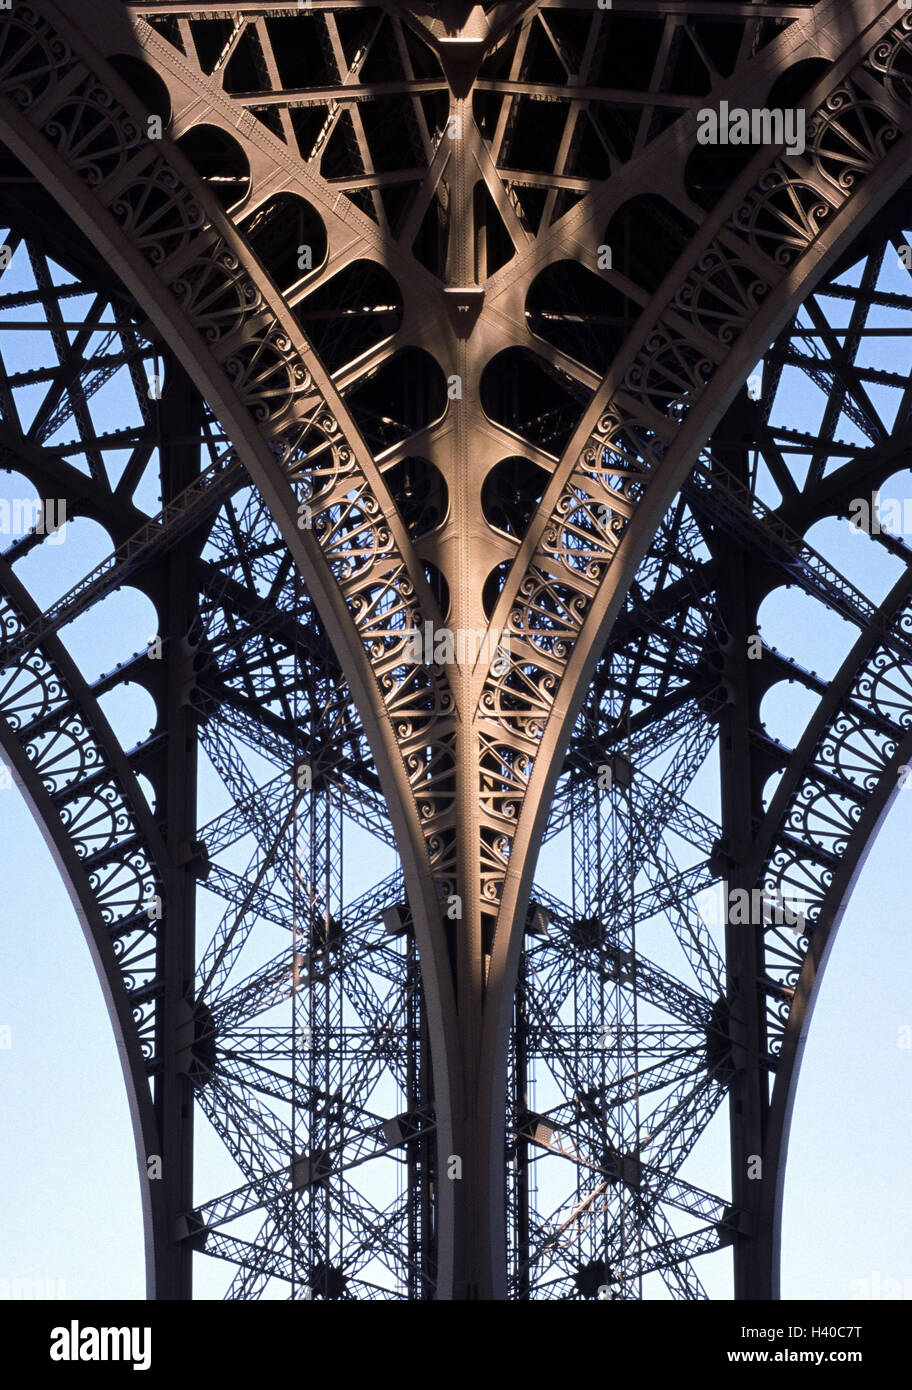 France, Paris, Eiffel Tower, close up, Europe, capital, tower, abutment, builds in 1887 - in 1889, height 320.8 m, construction, structure, steel, steel design work, architecture, architect Alexandre Gustave Eiffel, place of interest, landmark Stock Photo